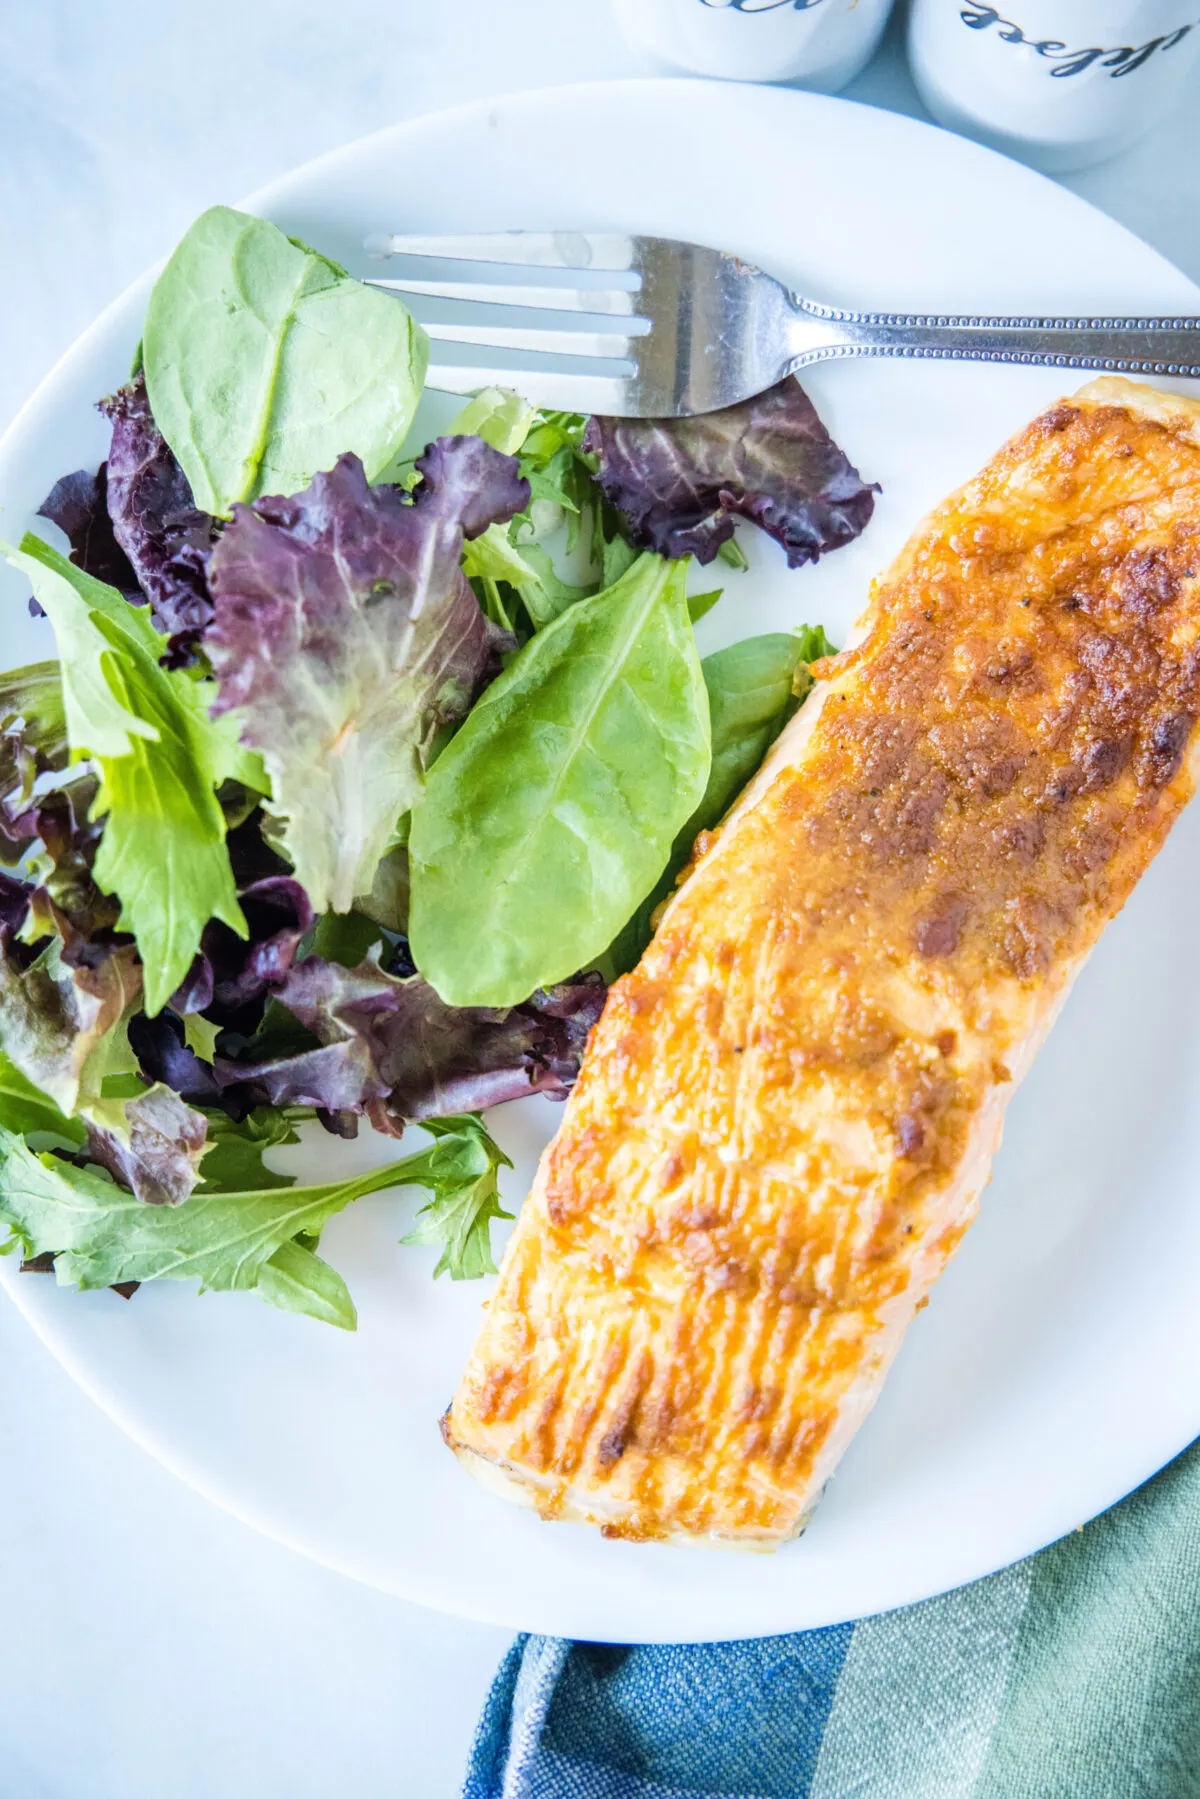 Overhead view of a plate with a salmon fillet, a green salad, and a fork.